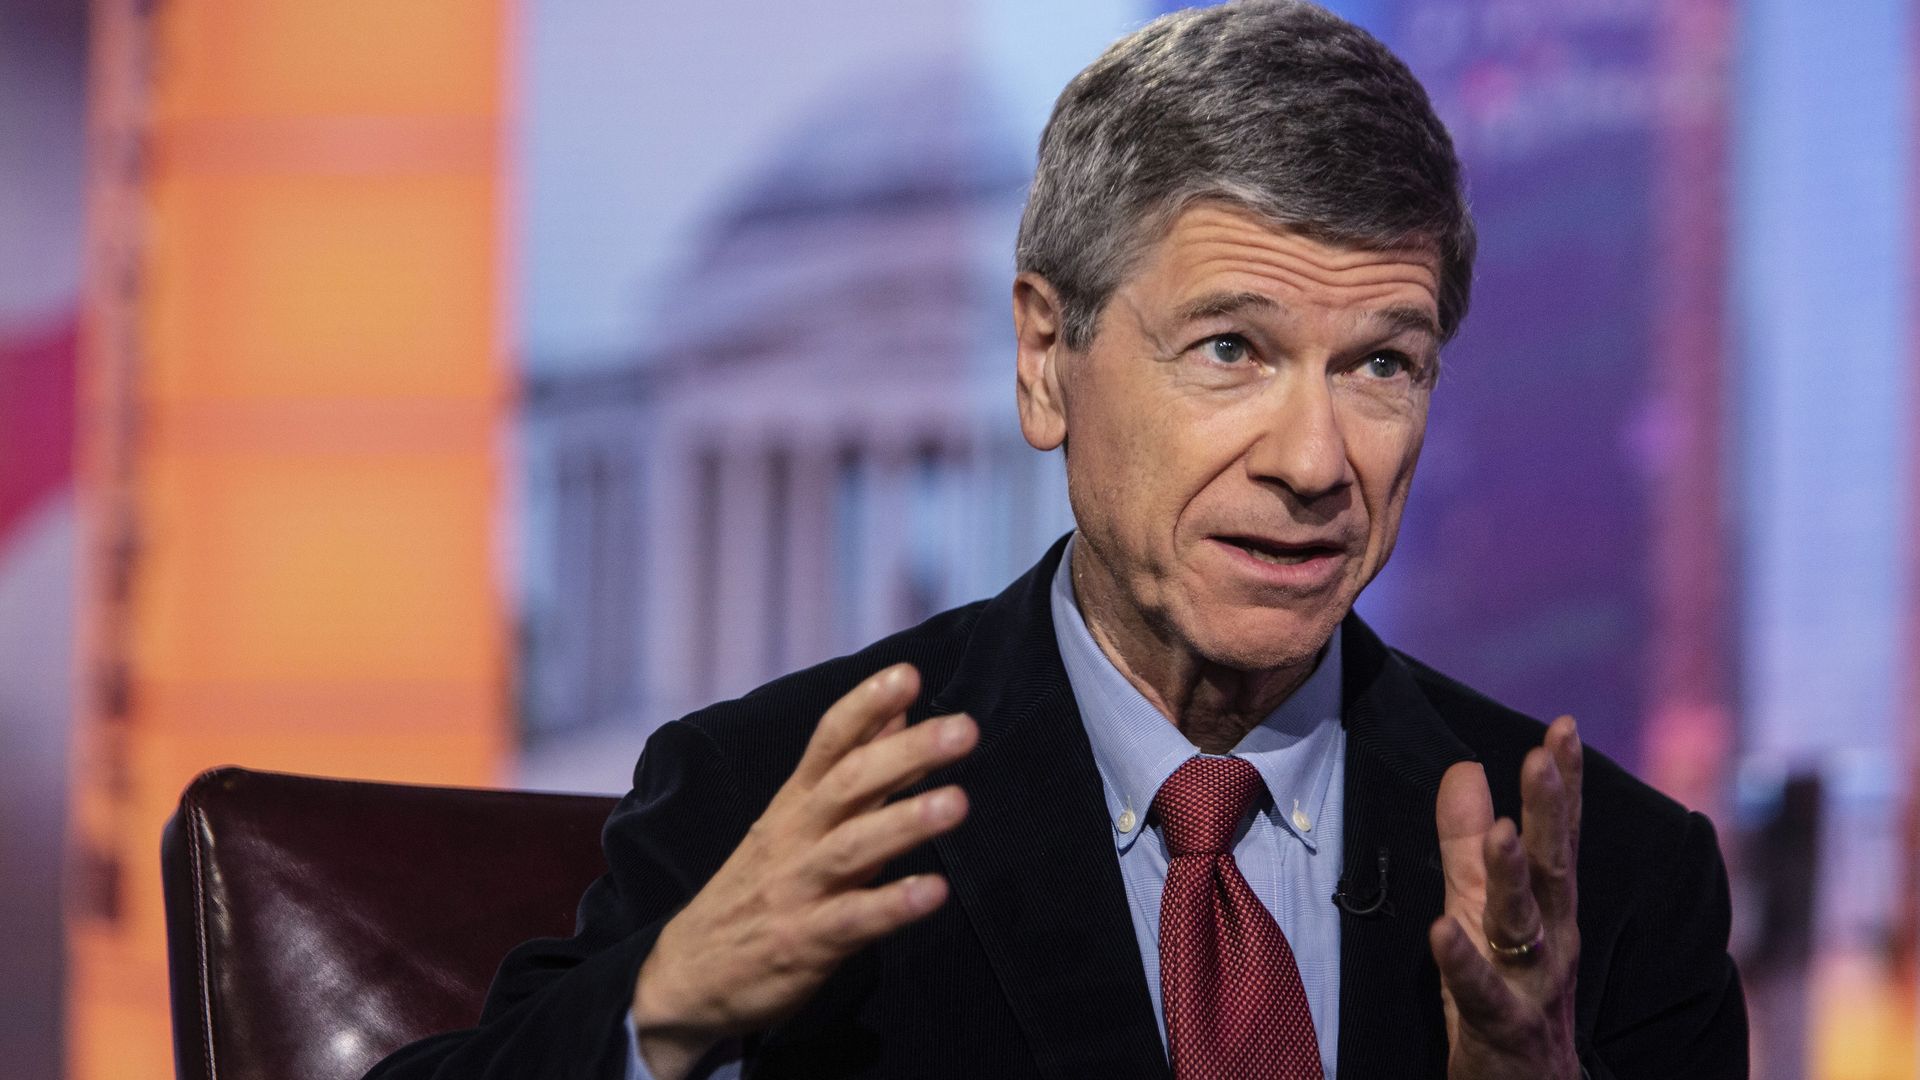 Jeffrey Sachs, a professor at Columbia University, speaks during a Bloomberg Television interview in New York